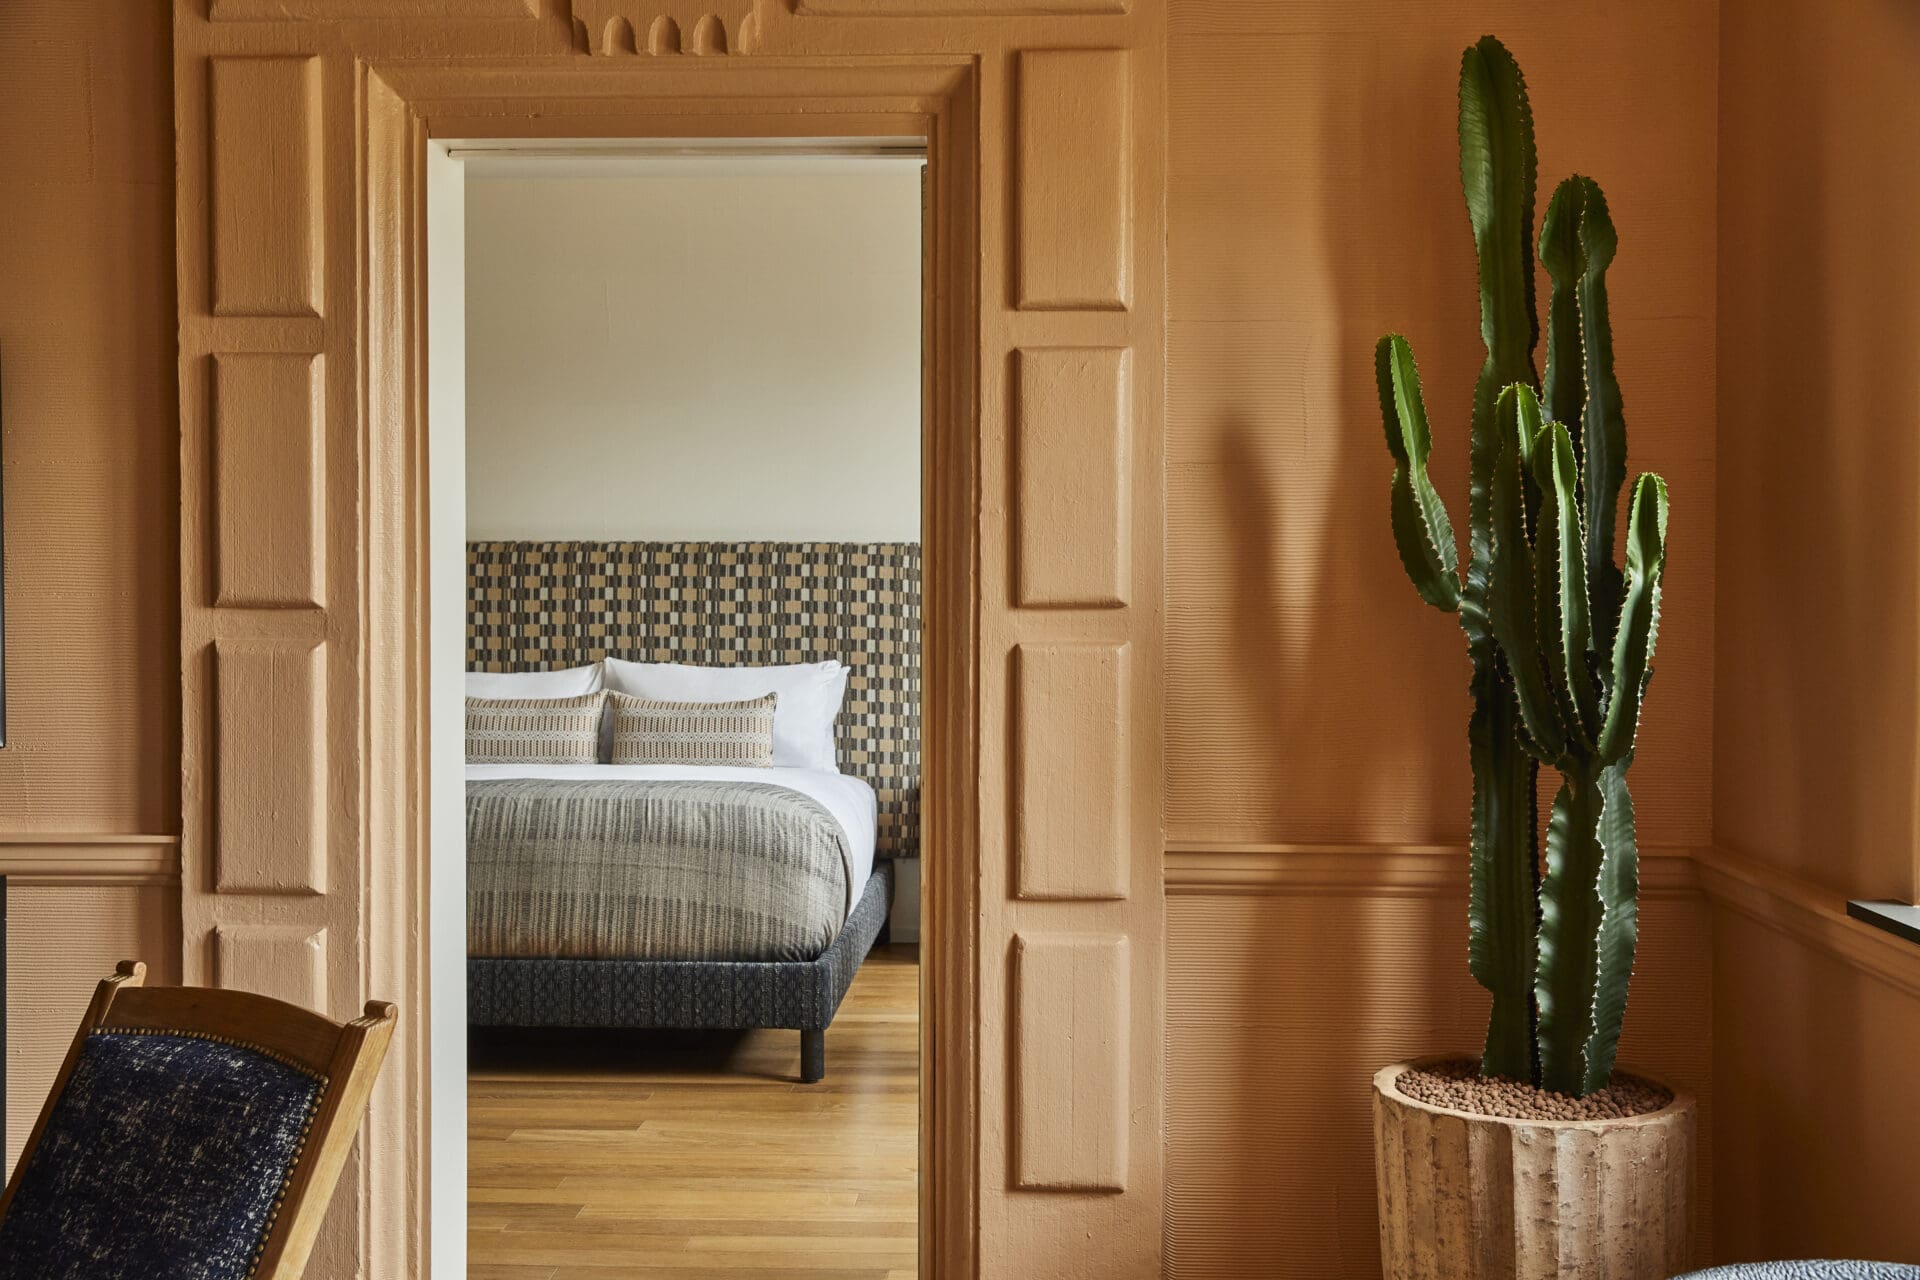 Places to stay in LA | A bedroom in Downtown LA Proper Hotel, with terracotta-toned walls and a potted cactus beside the door.